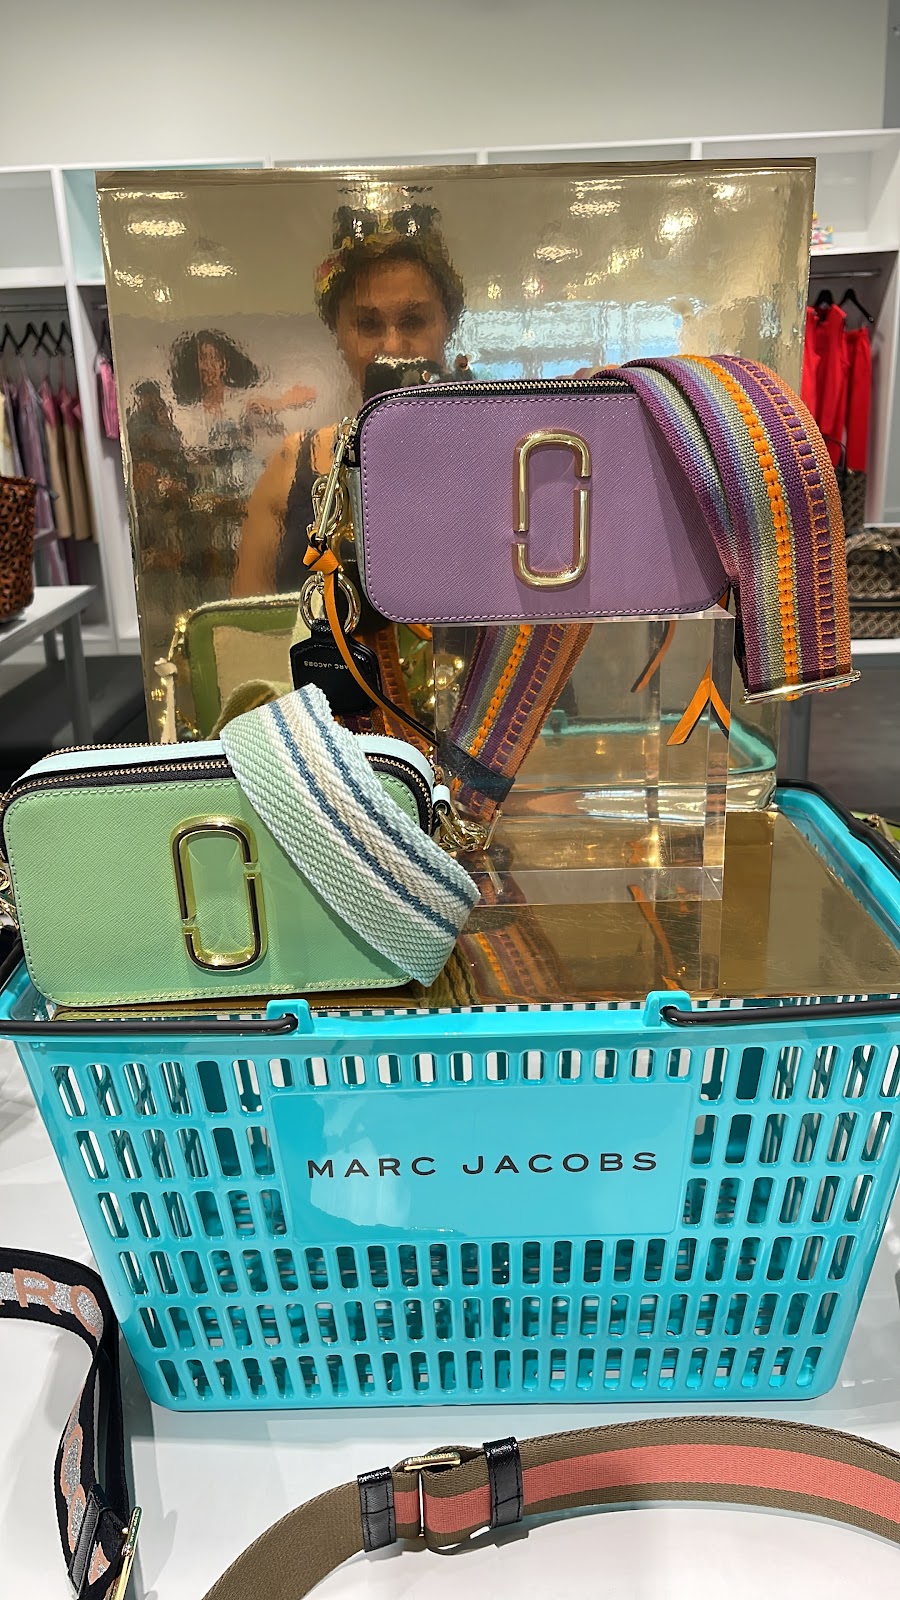 Marc Jacobs - Tampa Premium Outlets | 2364 Grand Cypress Dr Ste 215, Lutz, FL 33559, USA | Phone: (813) 726-2070